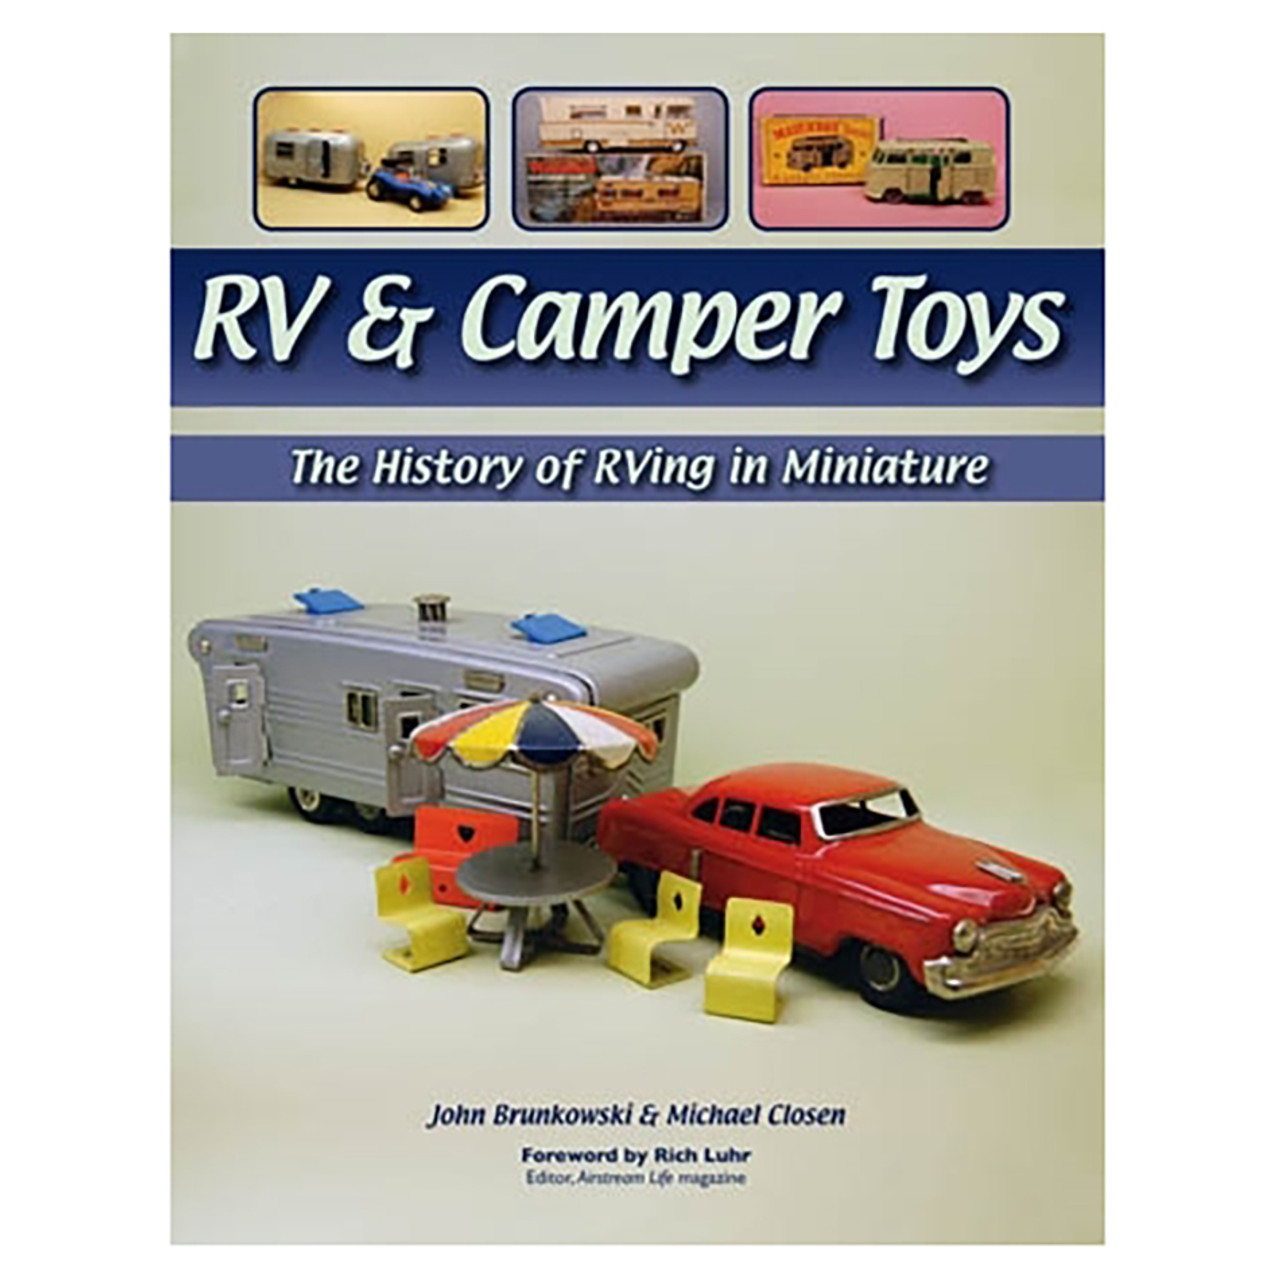 Book: RV & Camper Toys: The History of RVing in Miniature